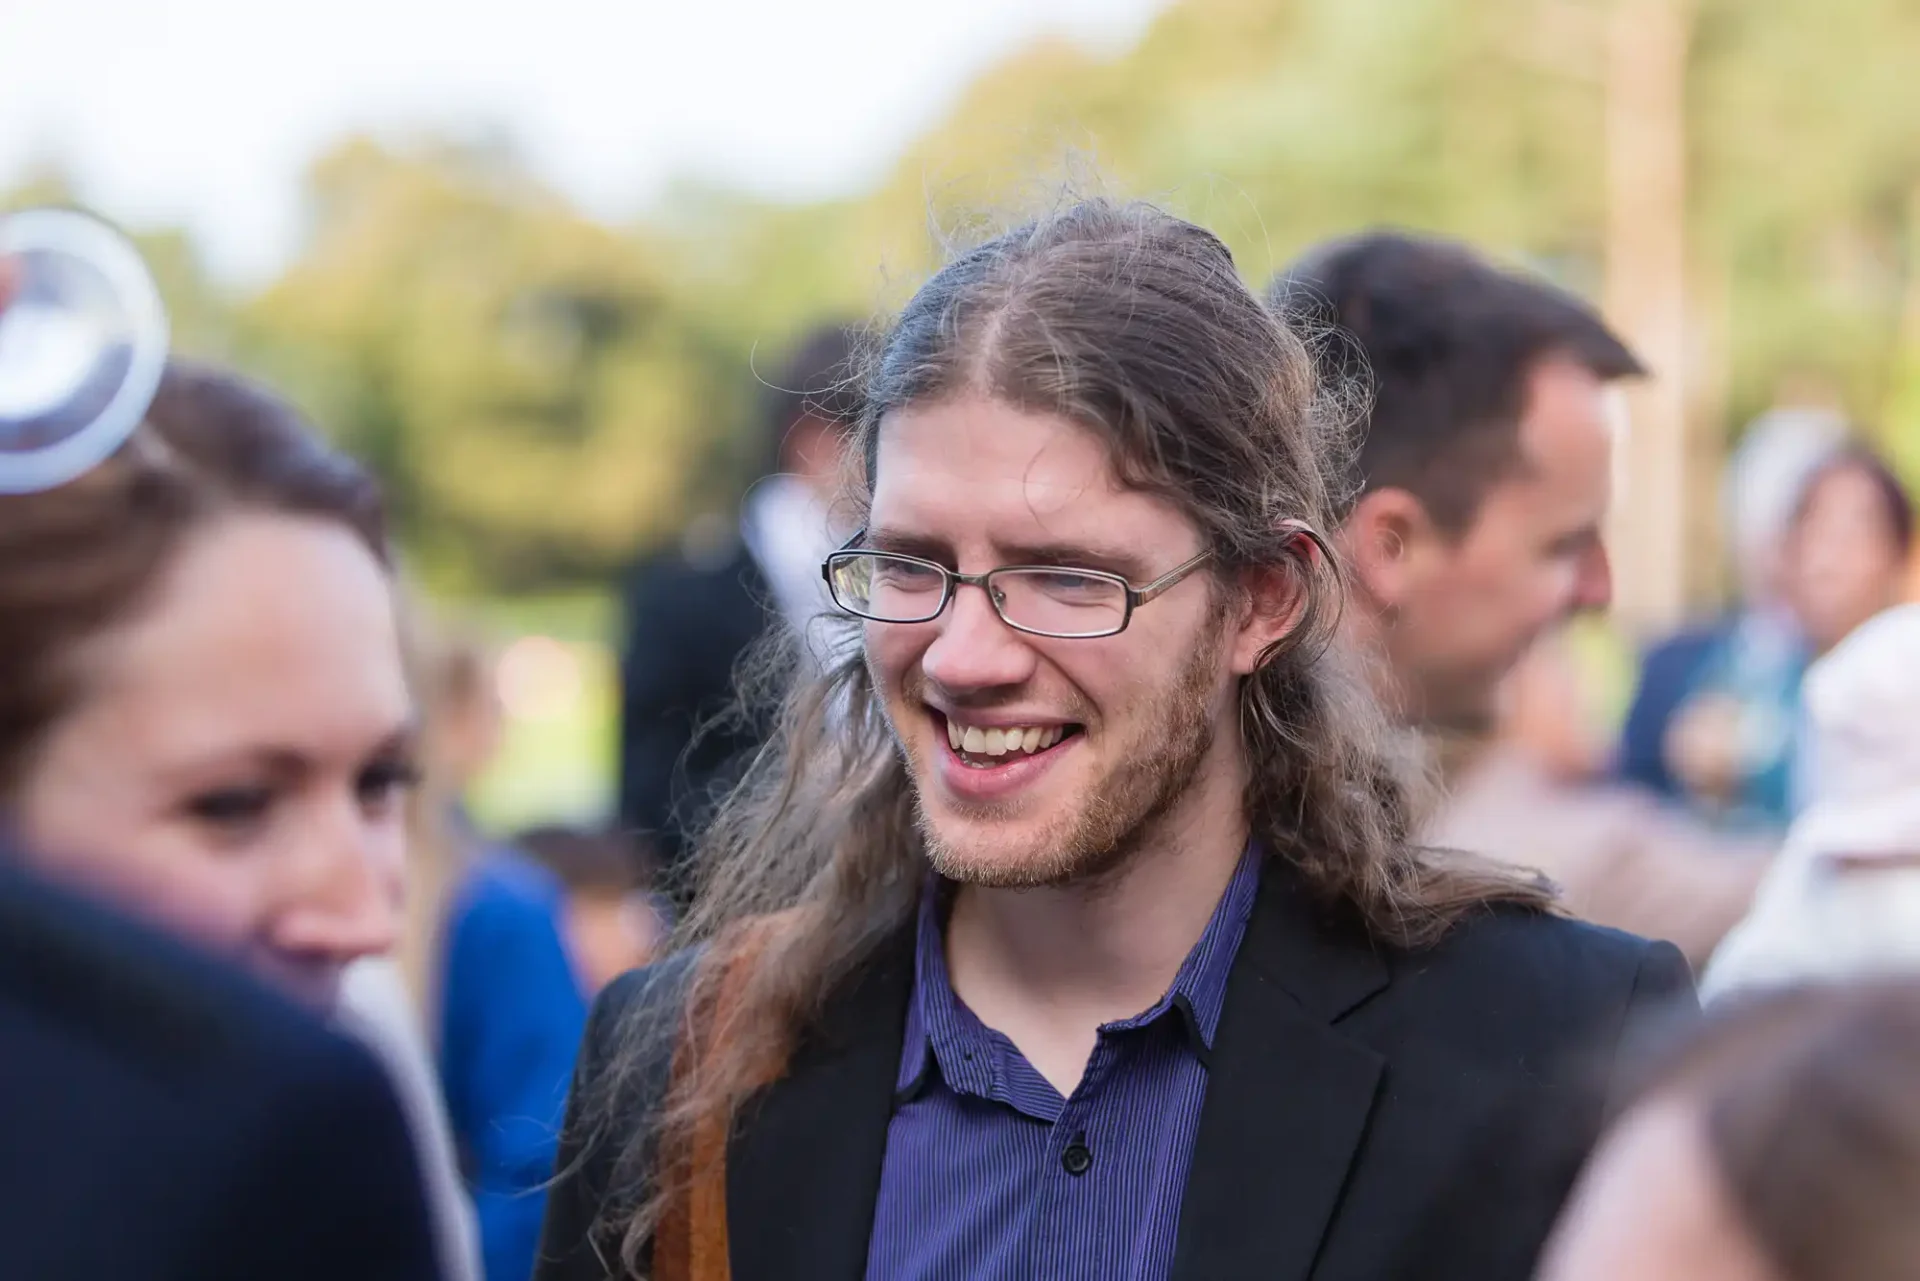 A man with long curly hair and glasses, smiling in a conversation at an outdoor event, dressed in a dark suit.